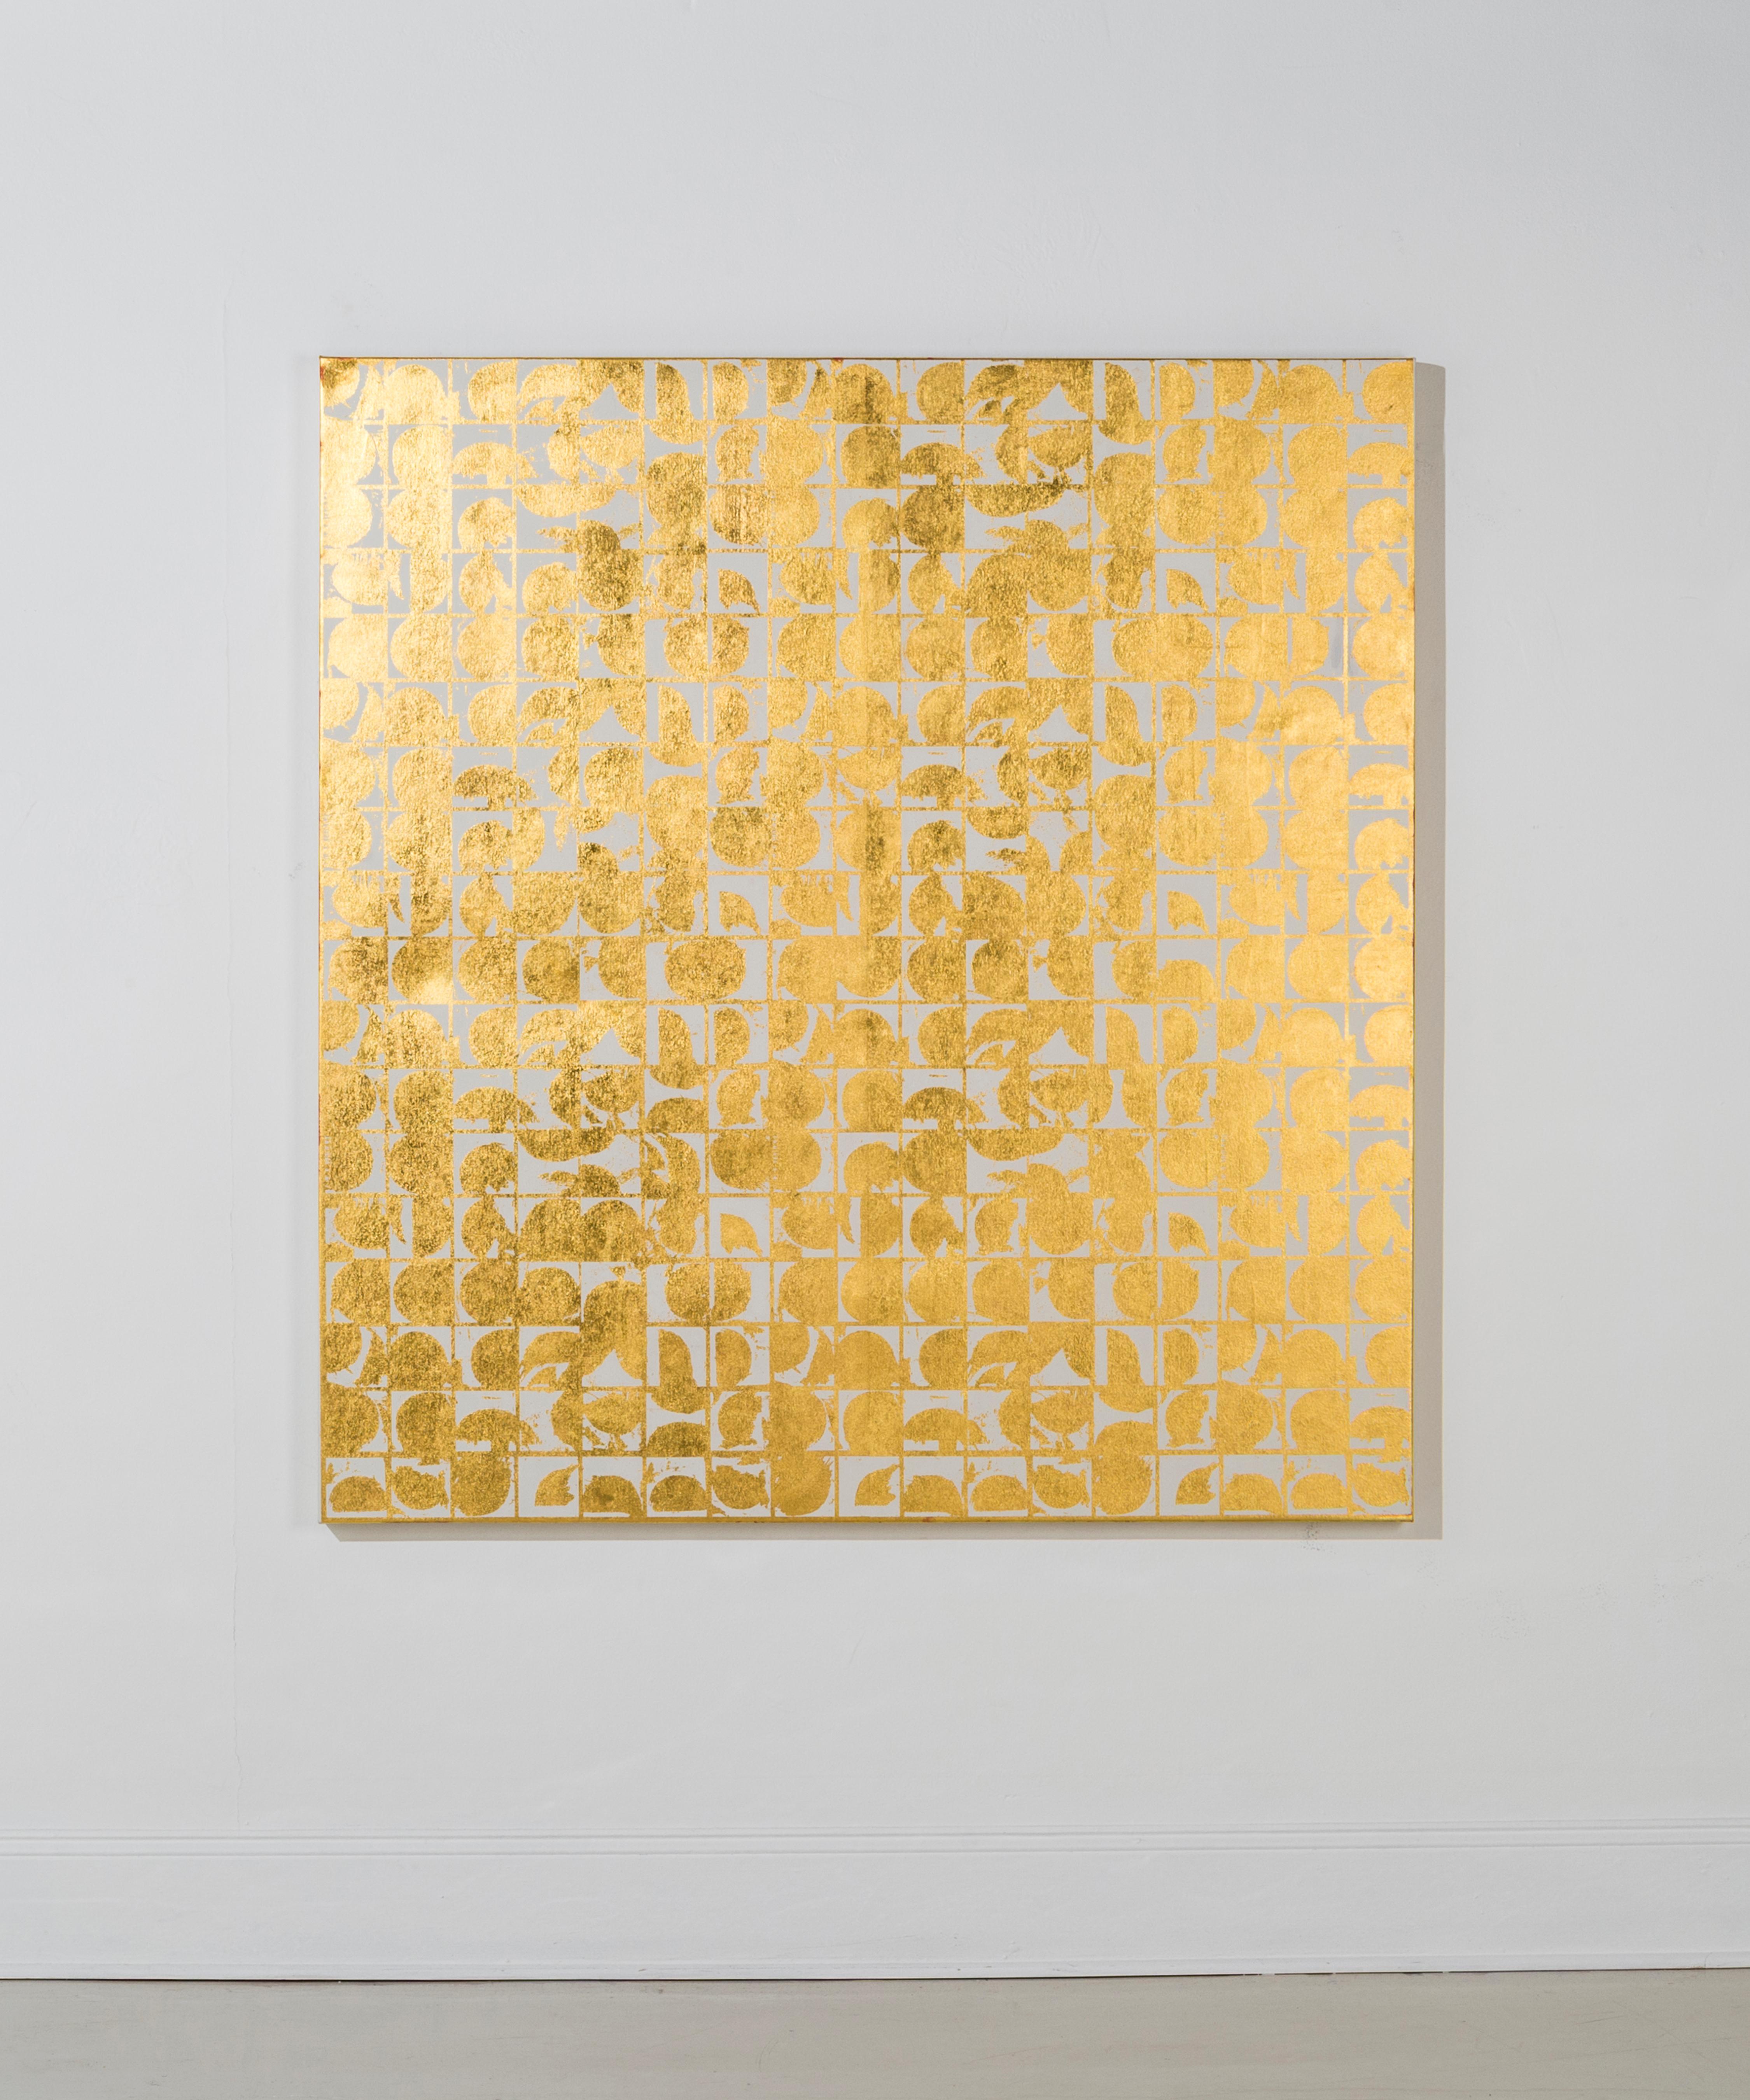 Lisa Hunt’s Rounds Positive Canvas I (Bone) is an abstract screen printed work on canvas, painted
with acrylic paint and hand-applied 24K gold leaf. It is a graphic, gridded abstract pattern
consisting of repeated with coil shapes. The works on